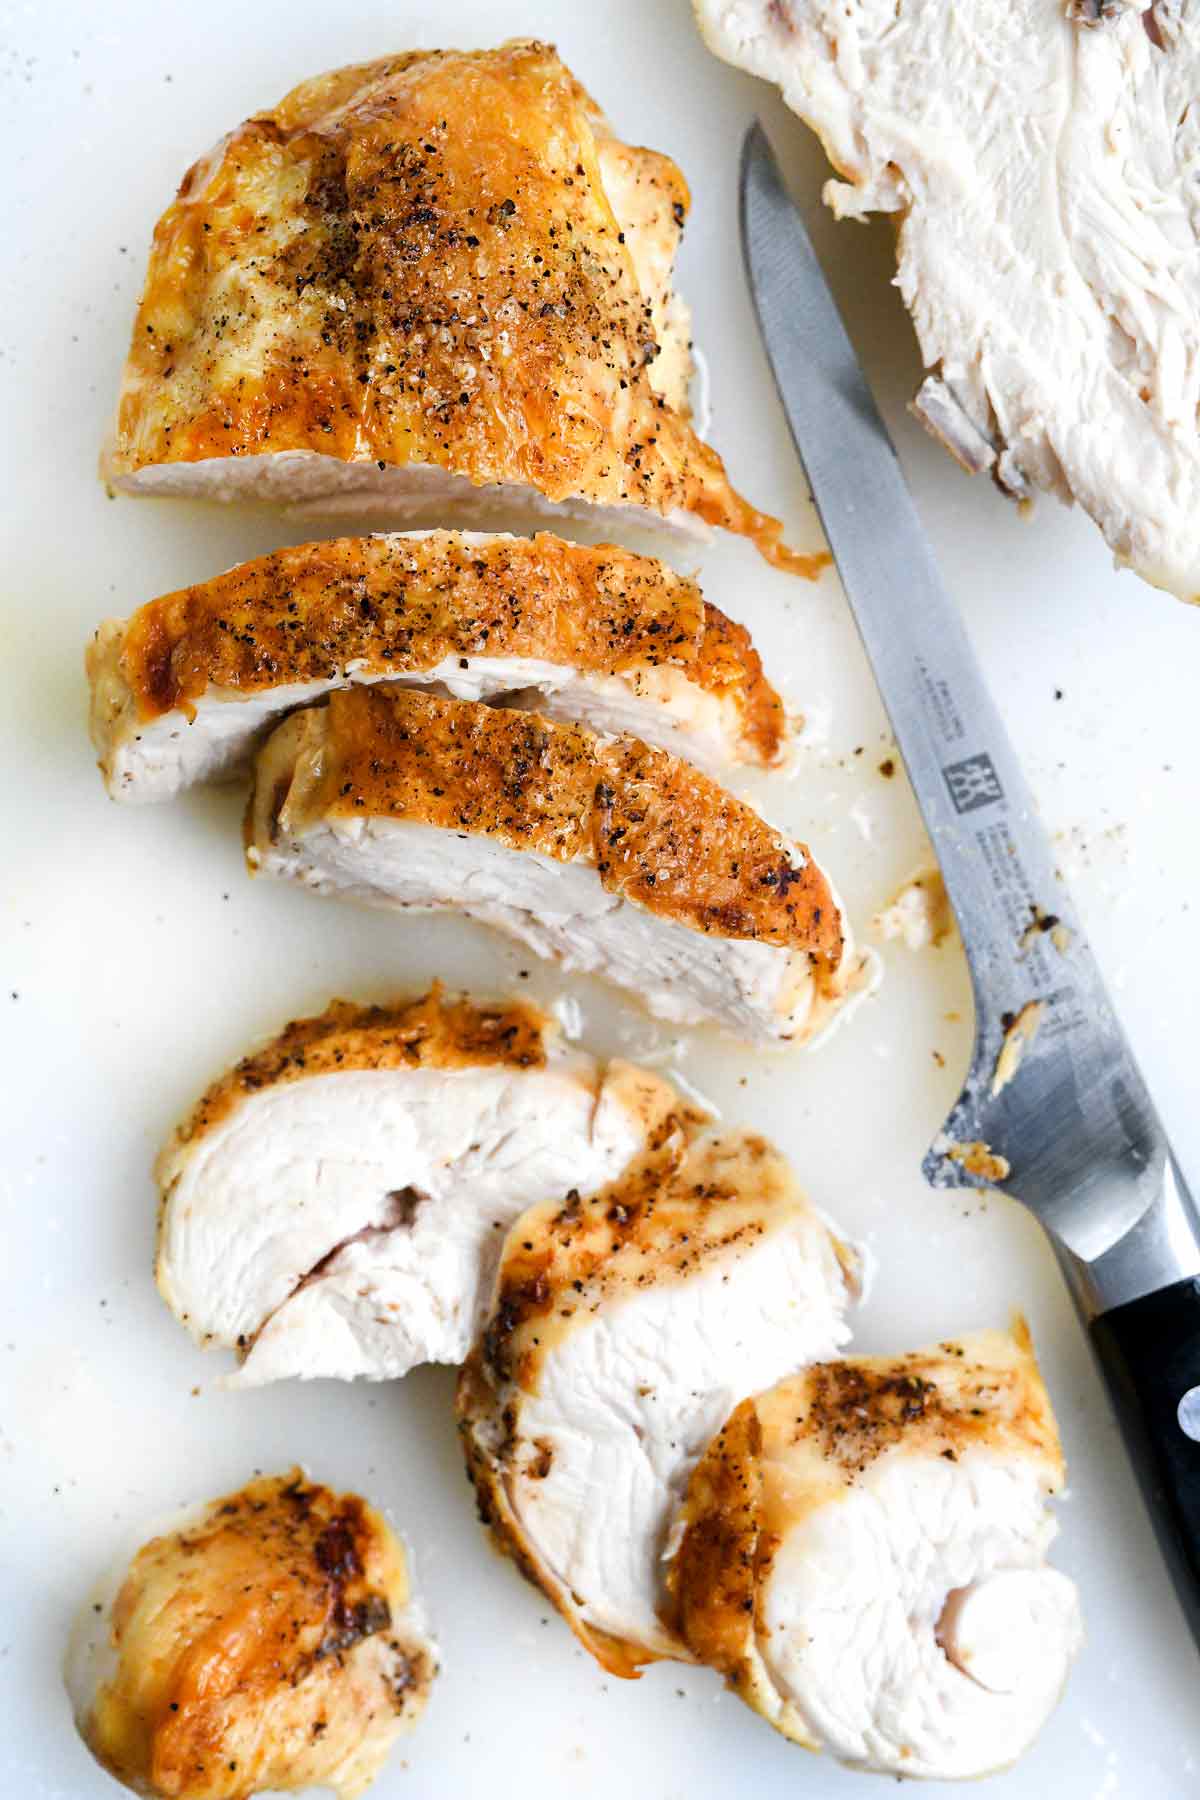 roasted skinless chicken breast